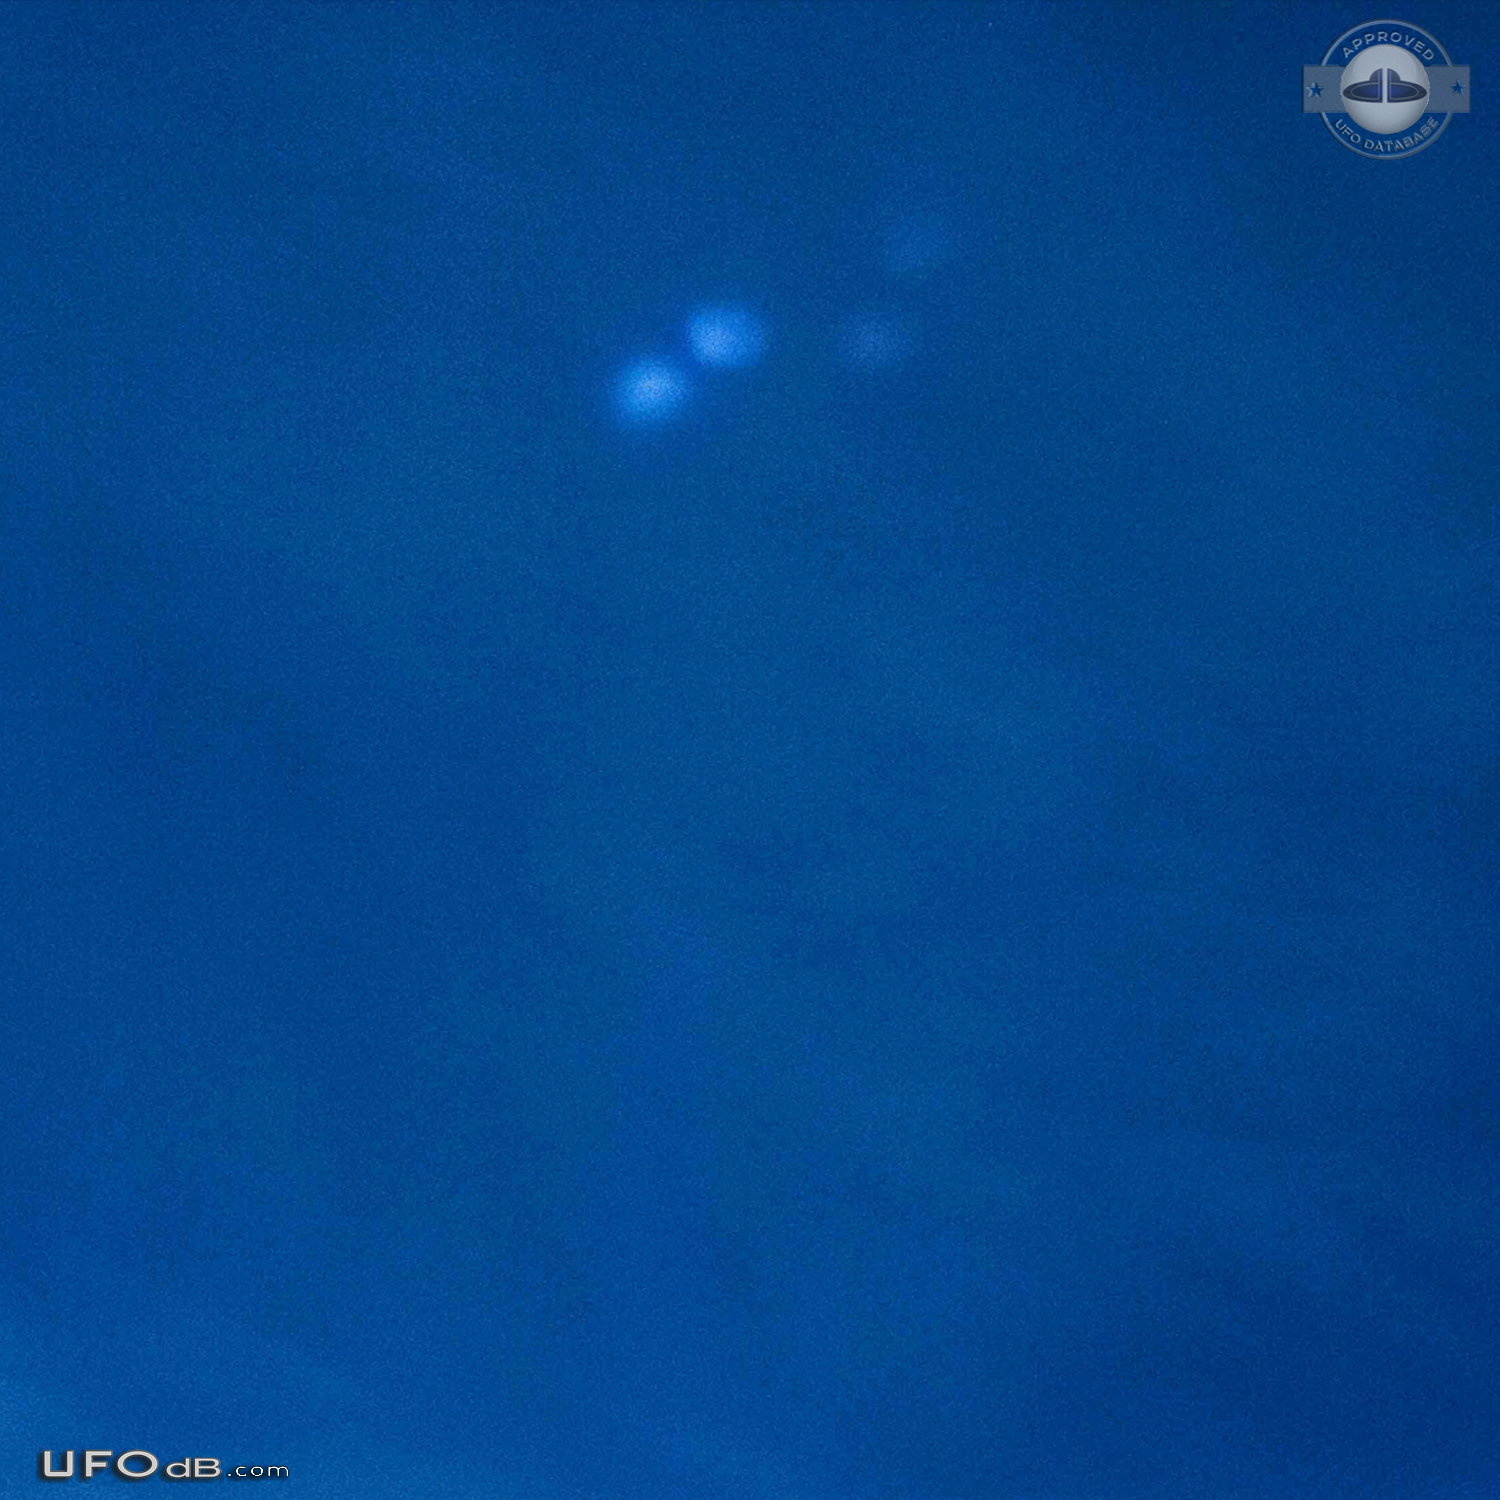 UFO light coming from inside clouds, circle shape. Blinking Pszczyna P UFO Picture #799-2